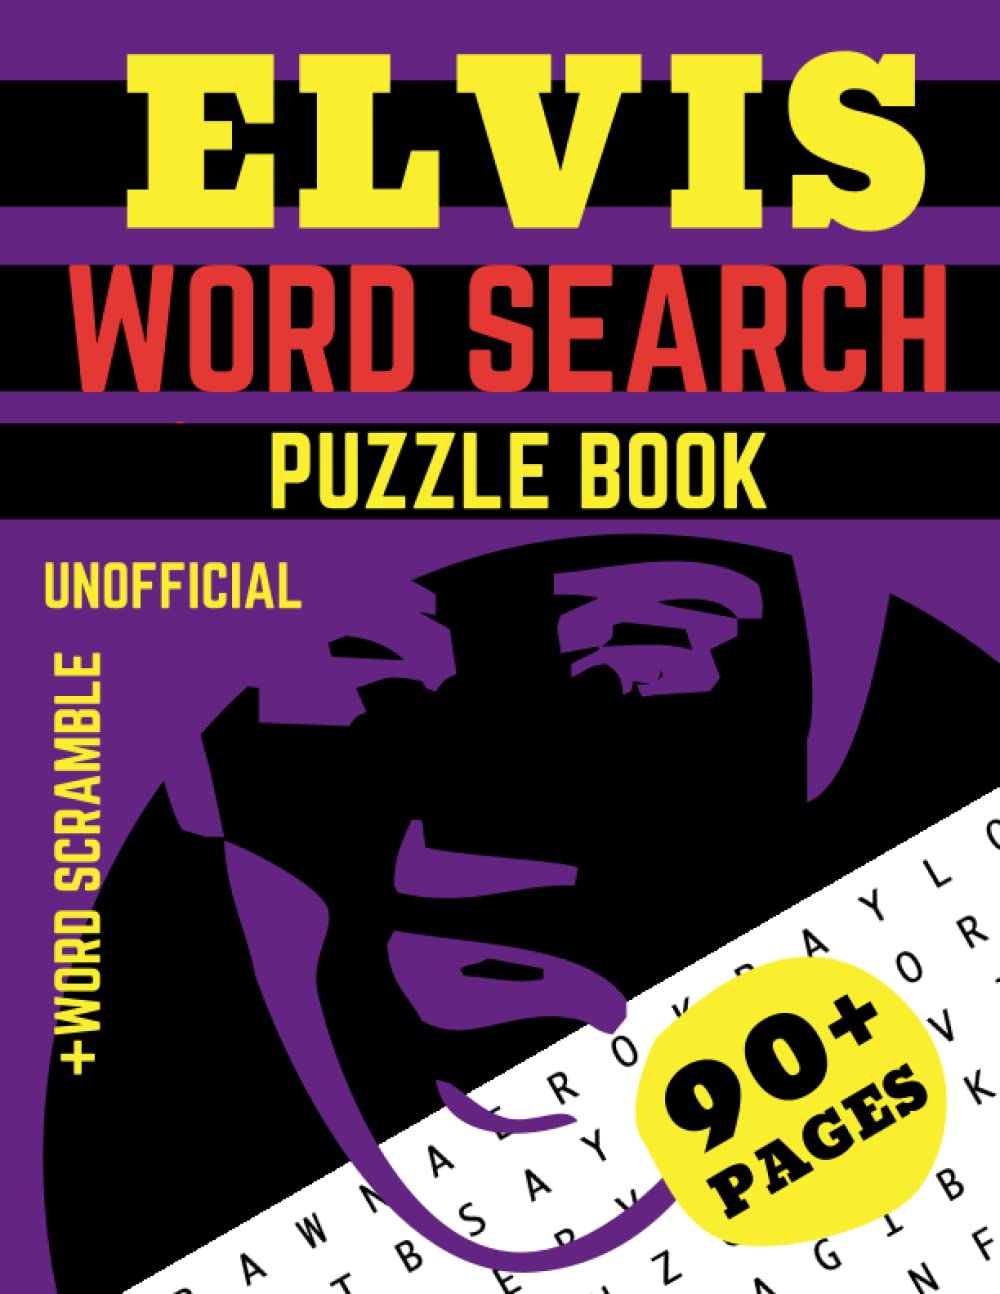 Elvis Word Search Puzzle Book and Word Scramble: The Unofficial, Large Print Word Search celebrating the King of Rock and Roll